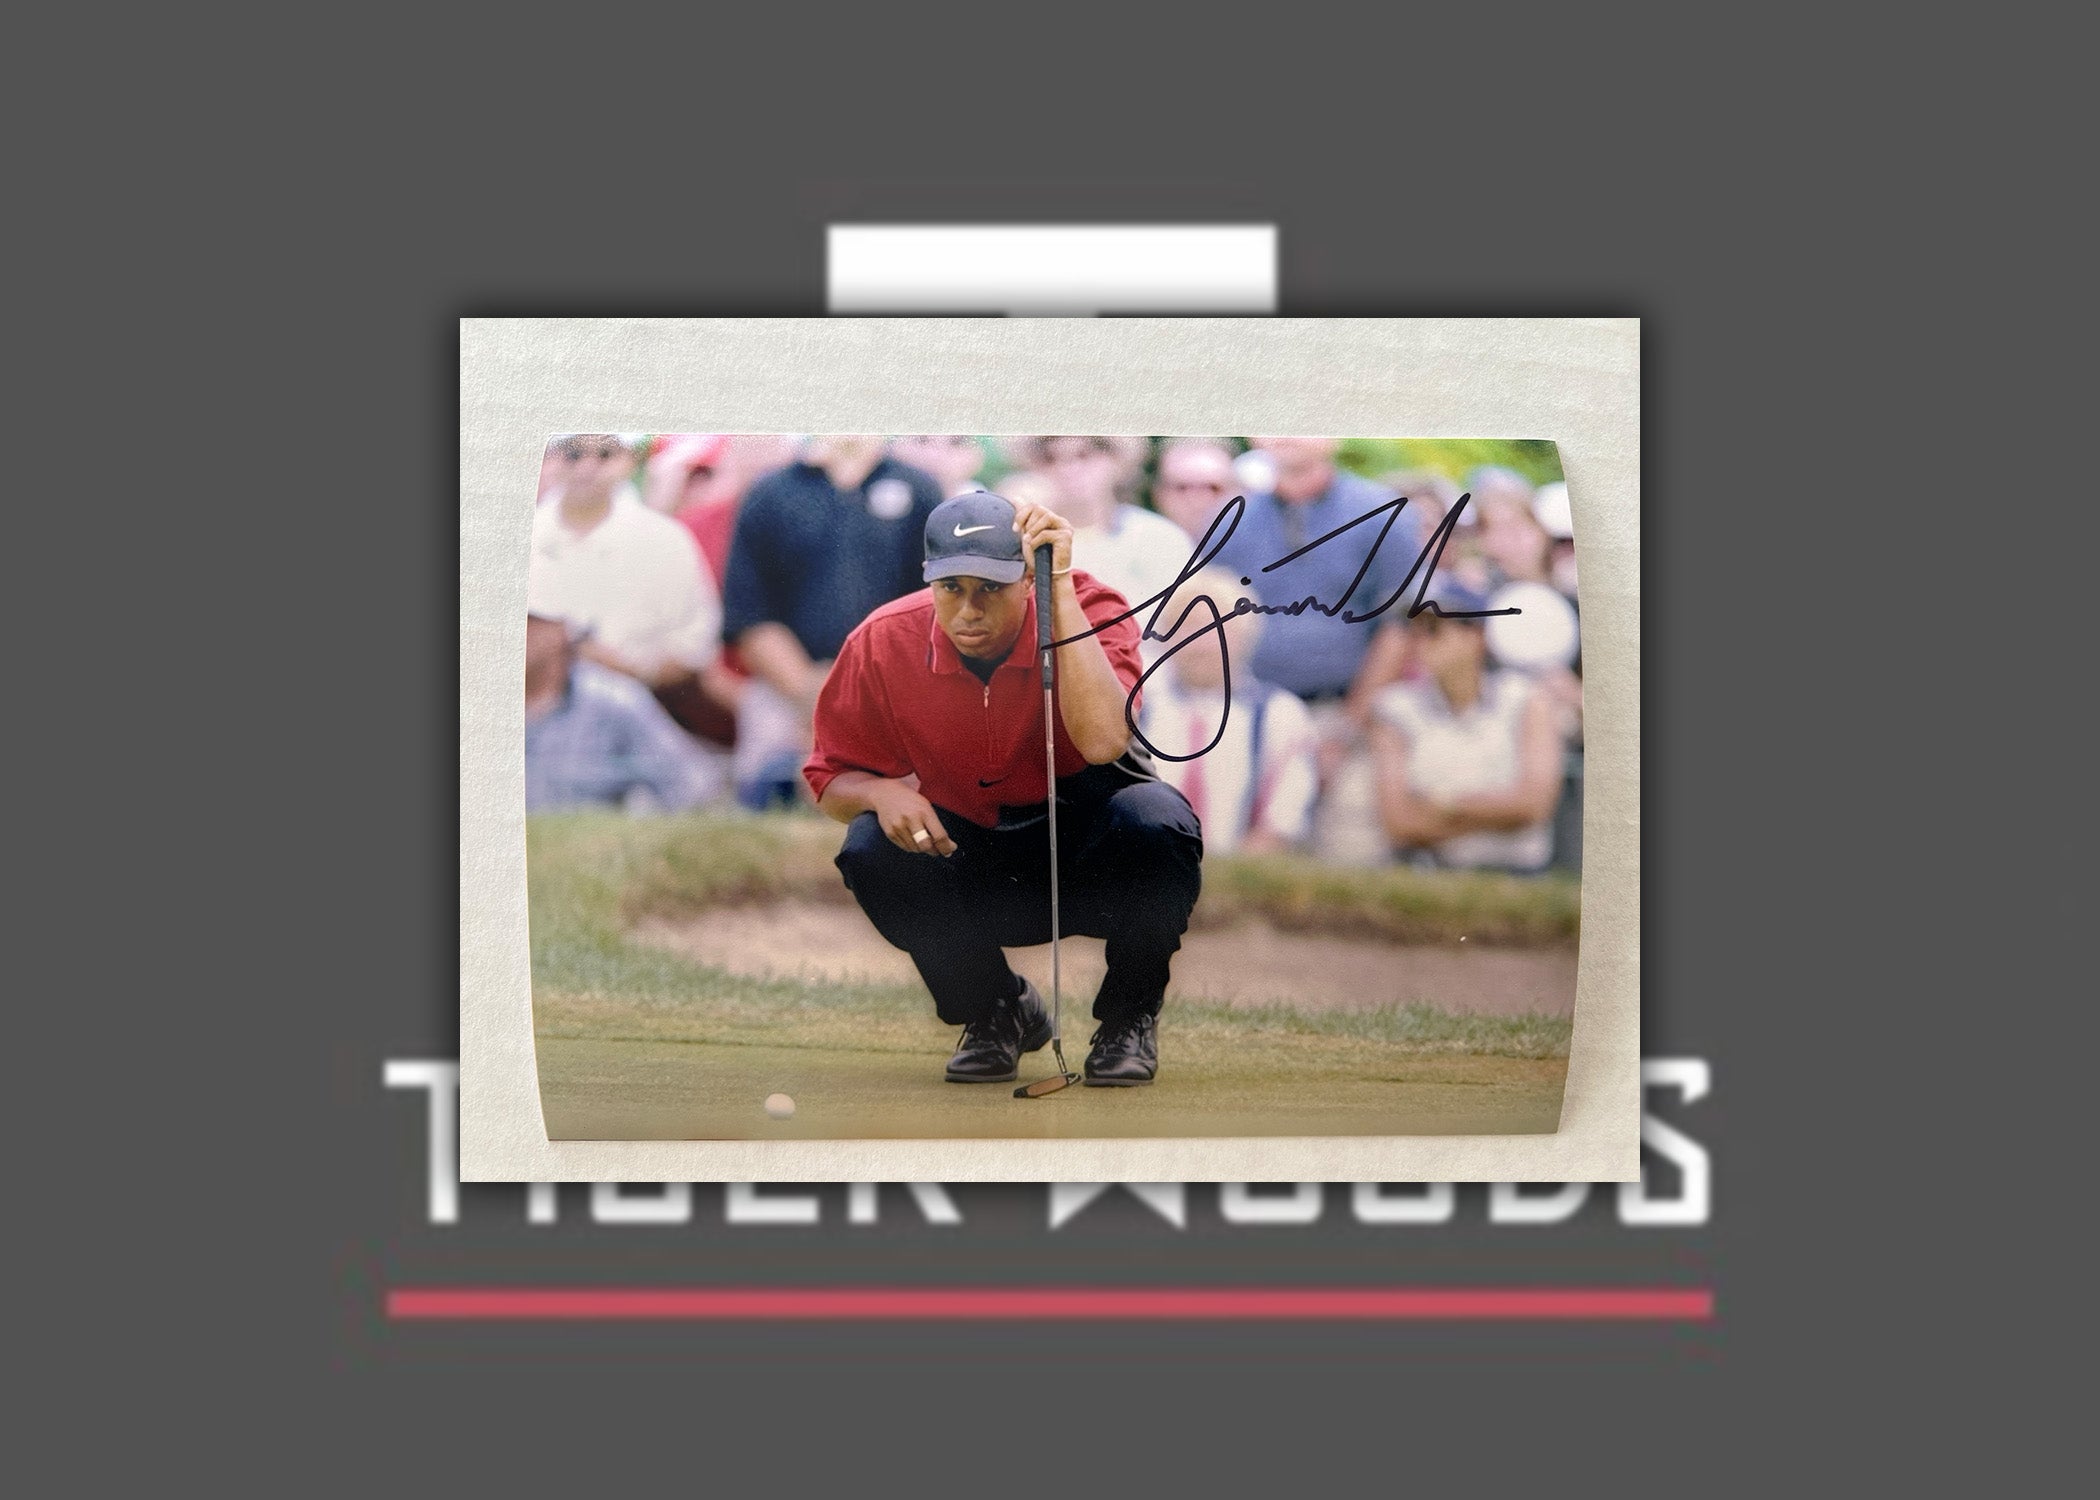 Tiger Woods 5x7 photograph signed with proof w/free acrylic frame VI